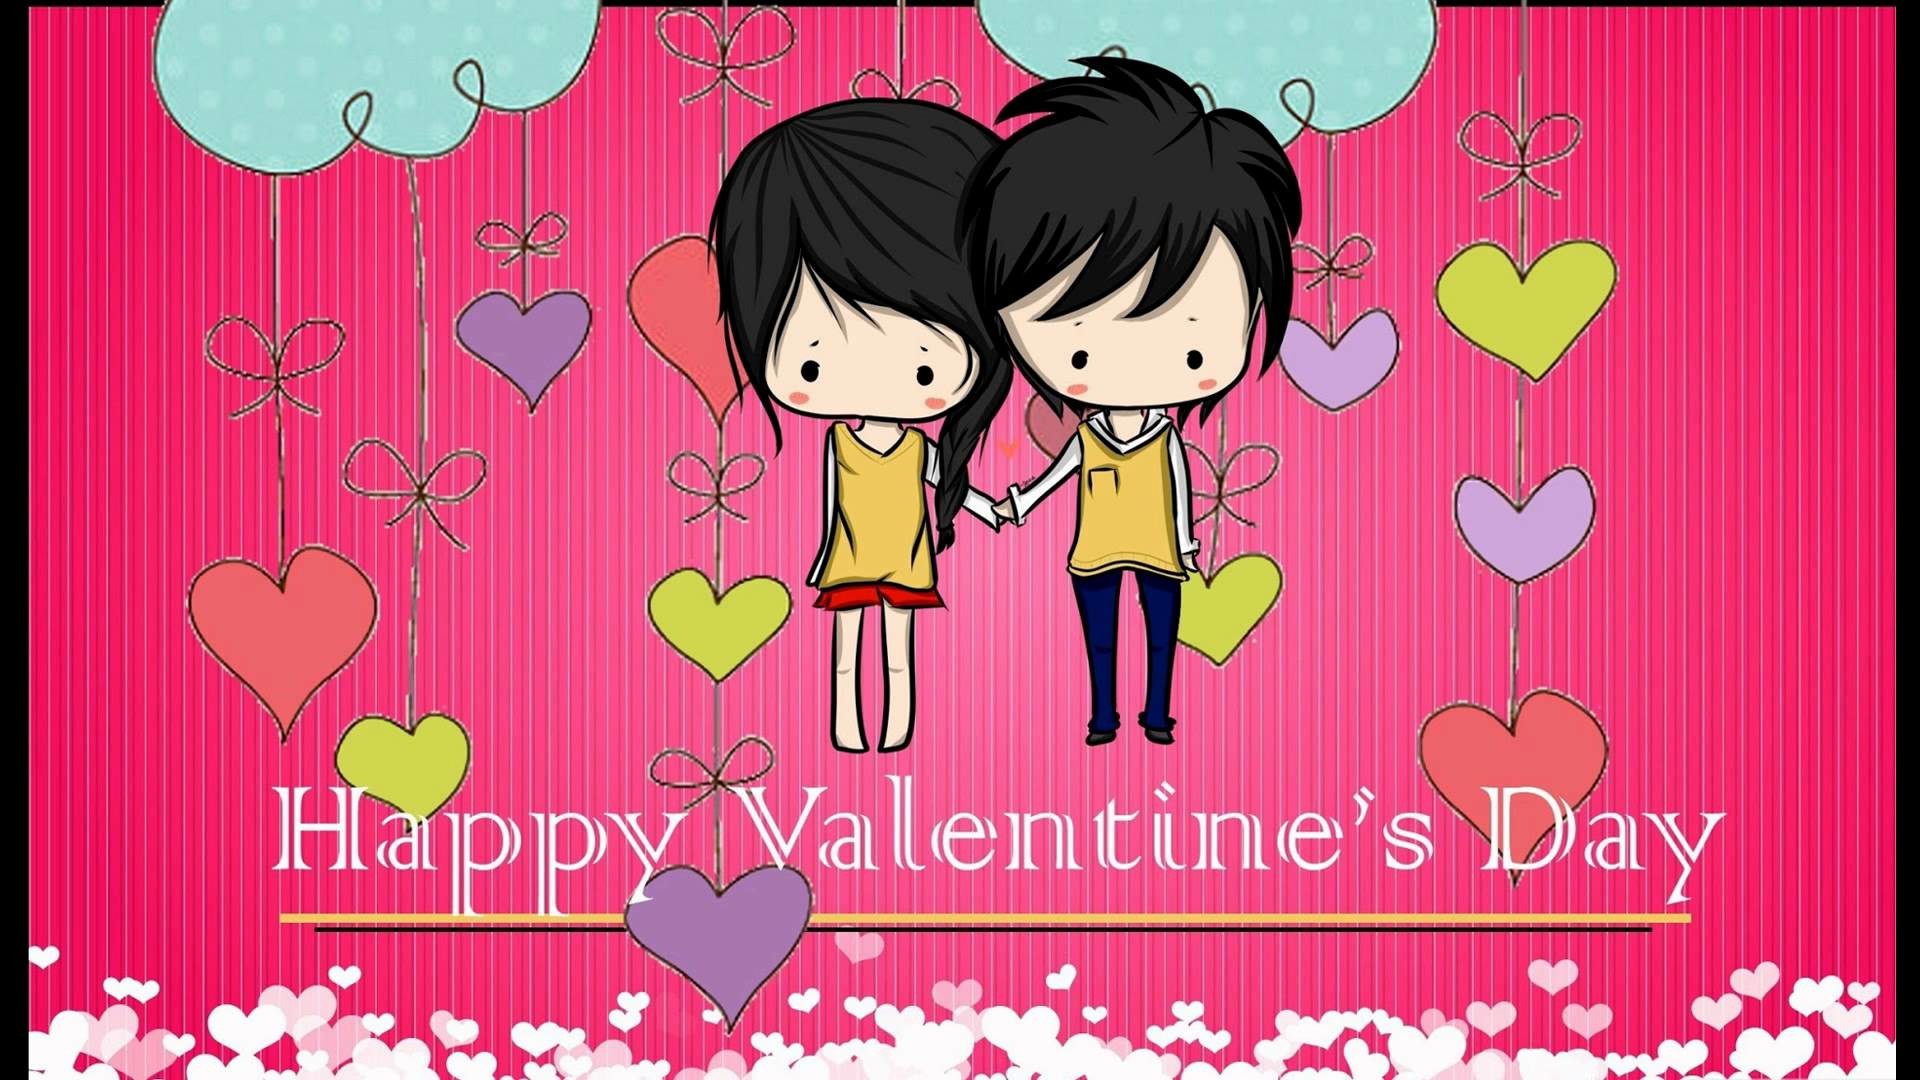 1920x1080 Top 10 Happy Valentine's Day Images|Wallpaper|picuture